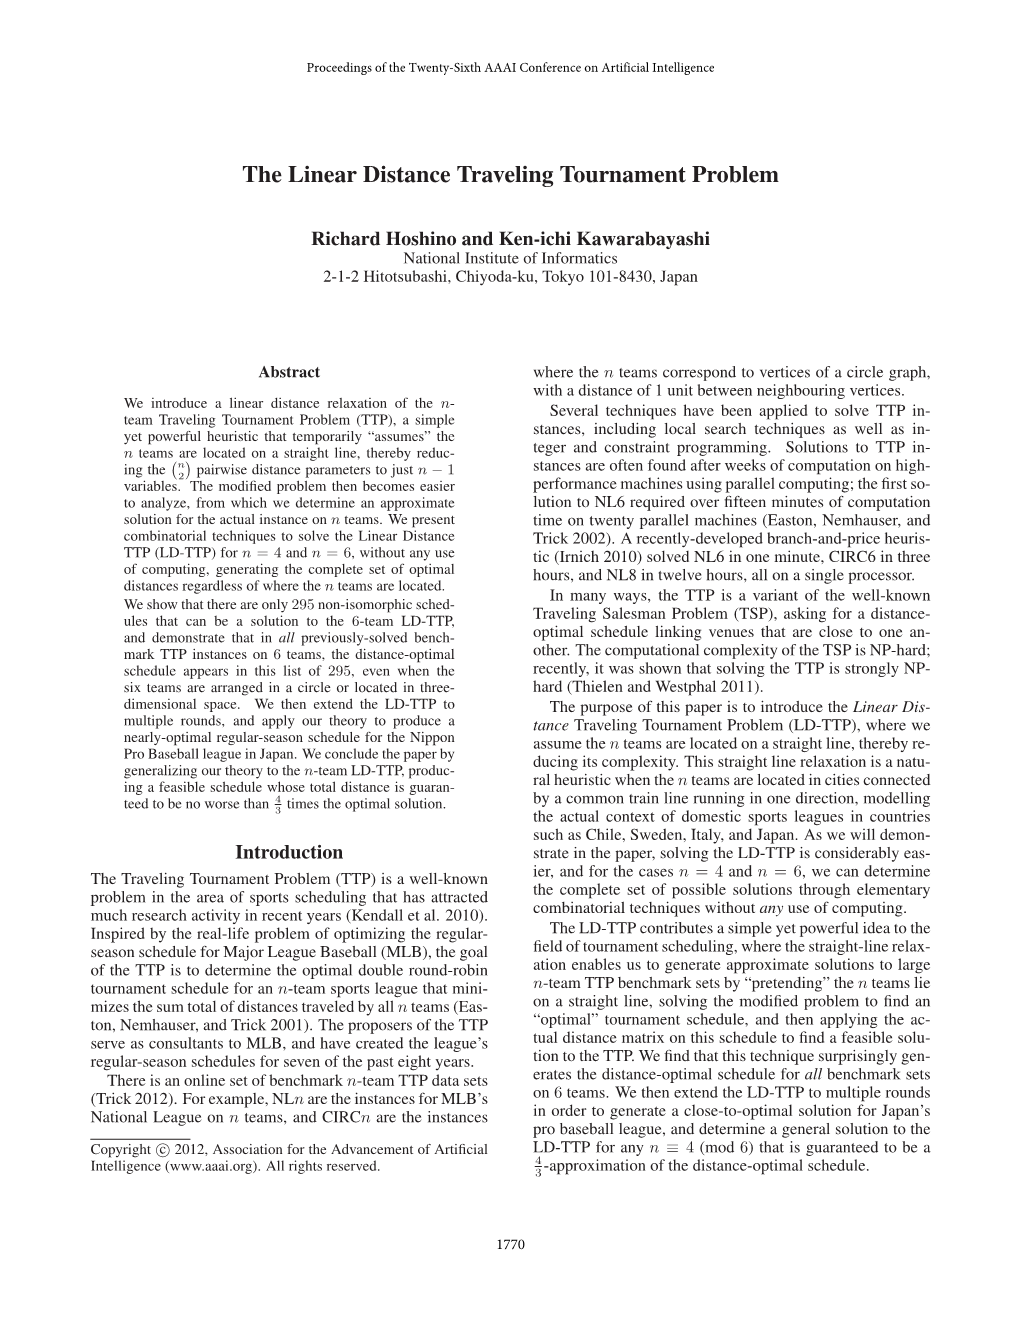 The Linear Distance Traveling Tournament Problem